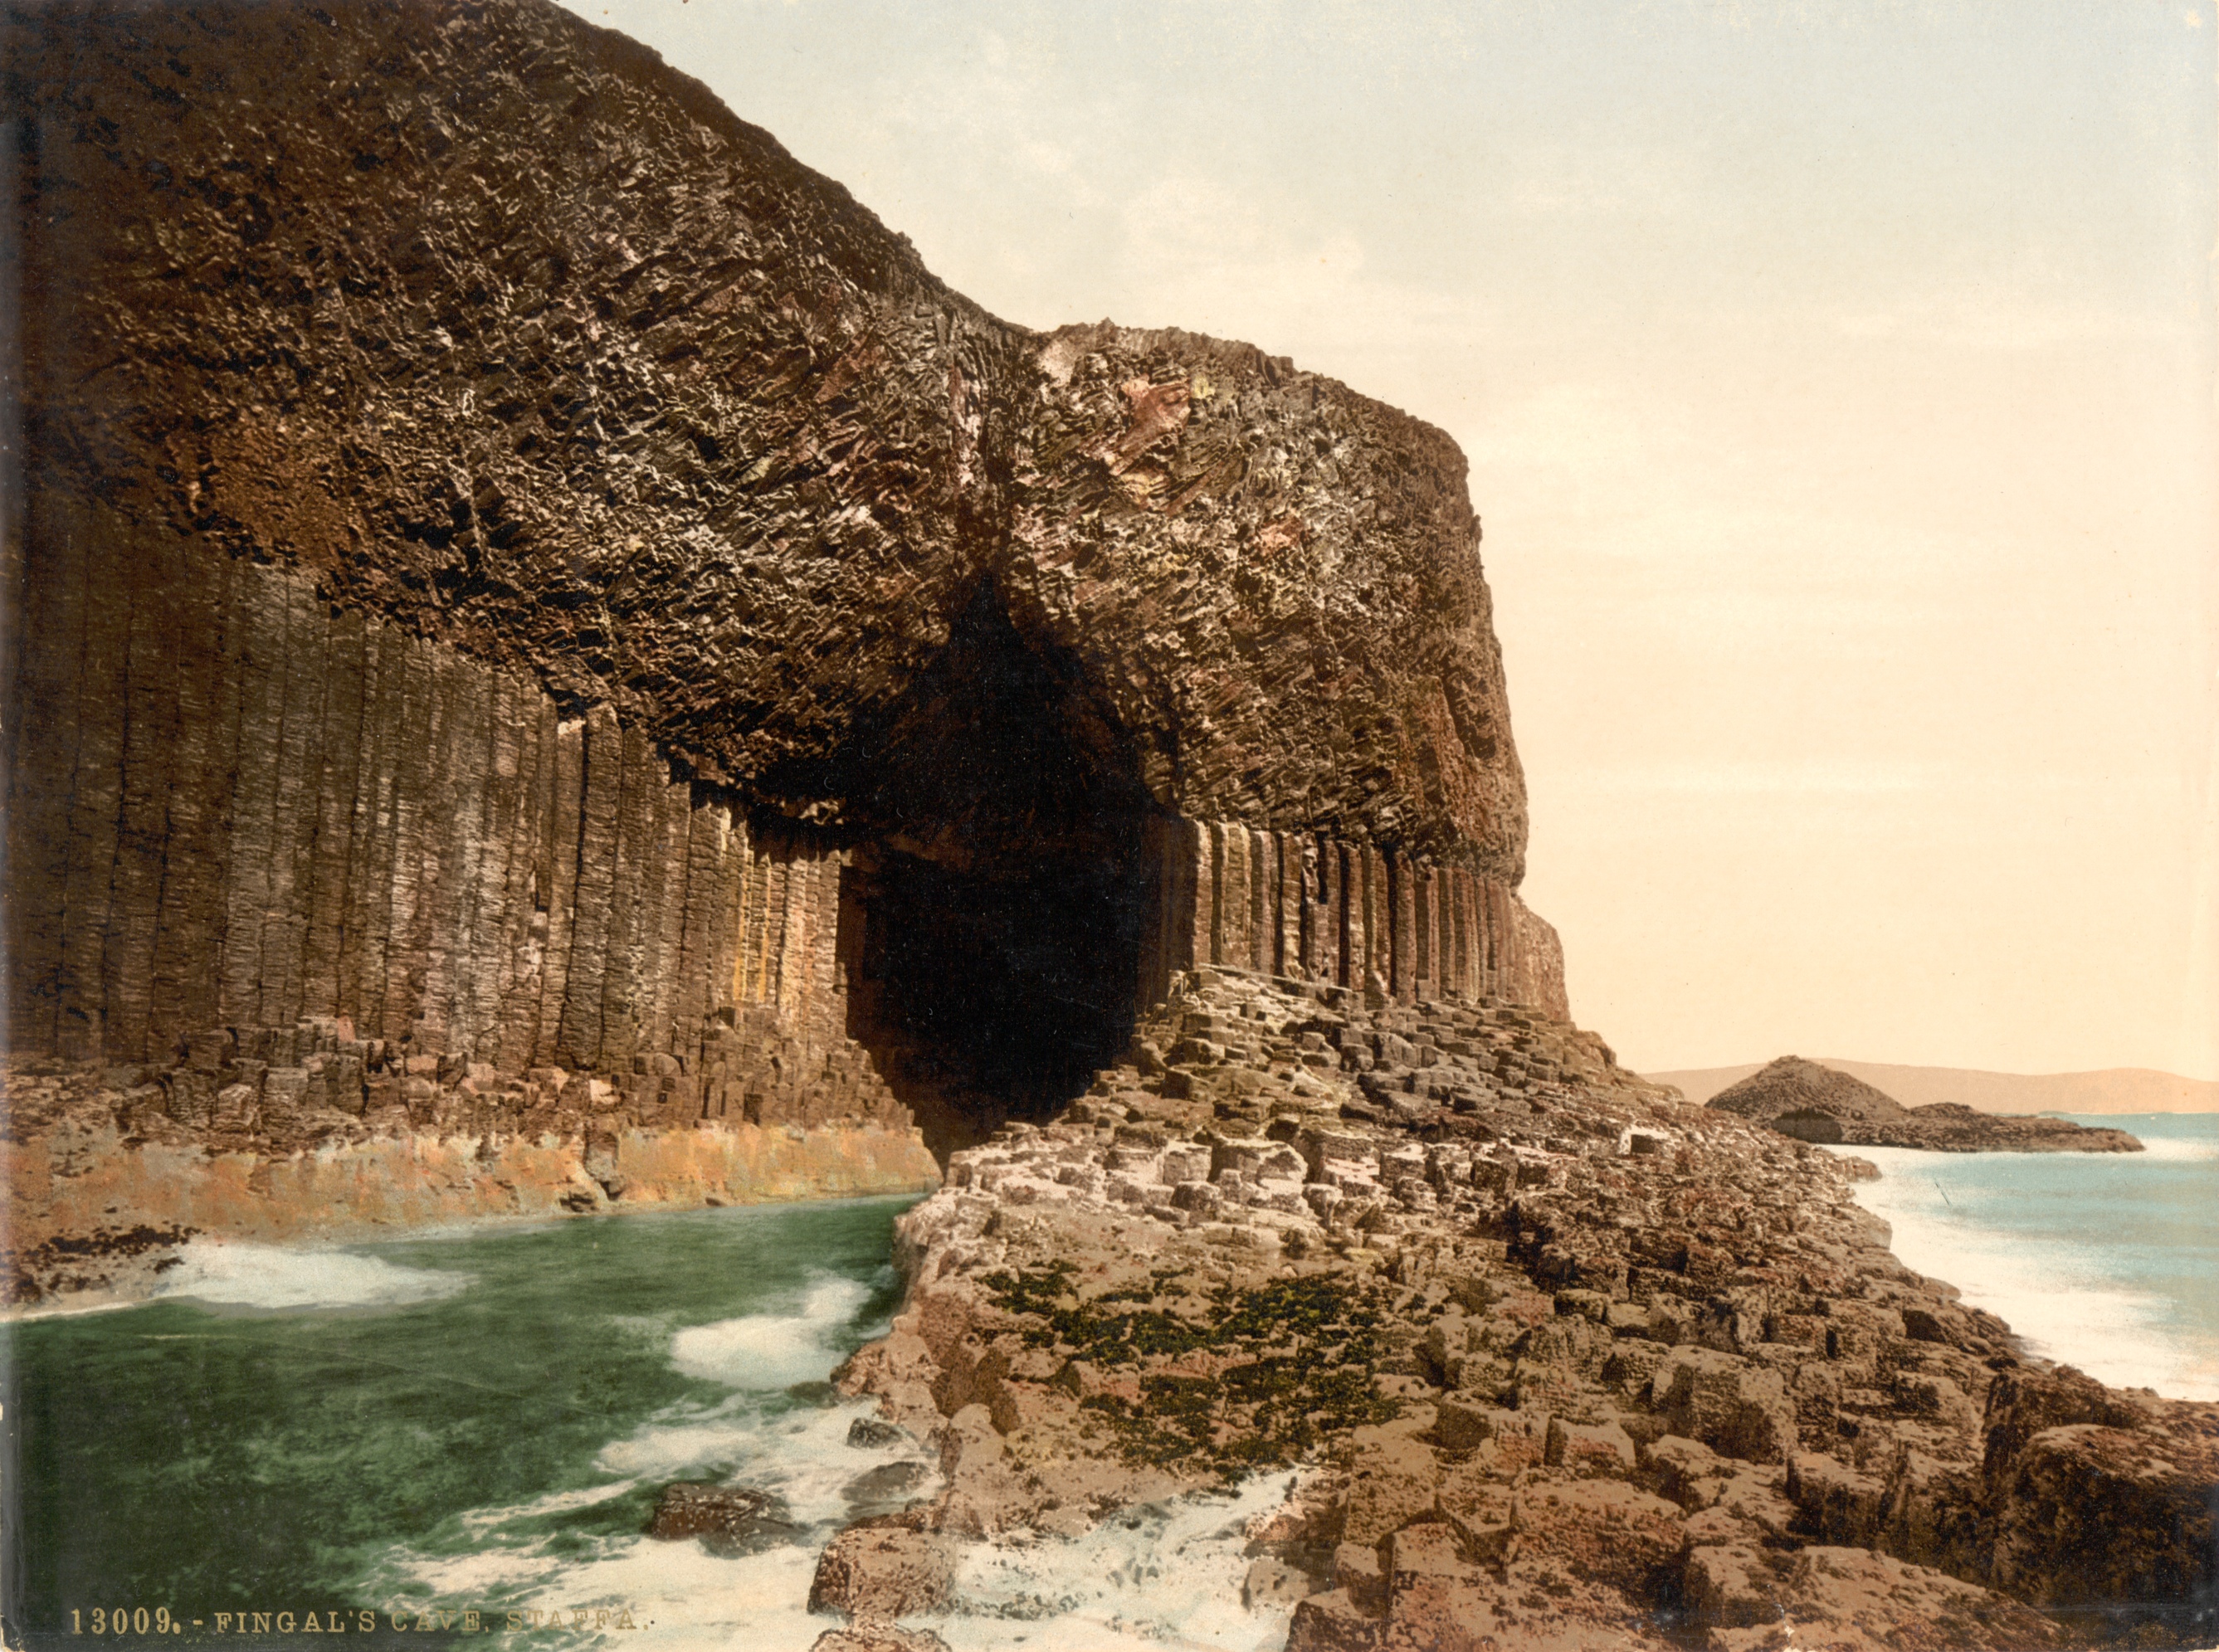 Fingal's Cave, Island of Staffa, Scotland, between 1890 and 1905, Original image: Photochrom print (color photo lithograph), Reproduction number: LC-DIG-ppmsc-07617  from Library of Congress, Prints and Photographs Division, PhotochromPrints Collection, correction couleurs par Jan Arkesteijn)